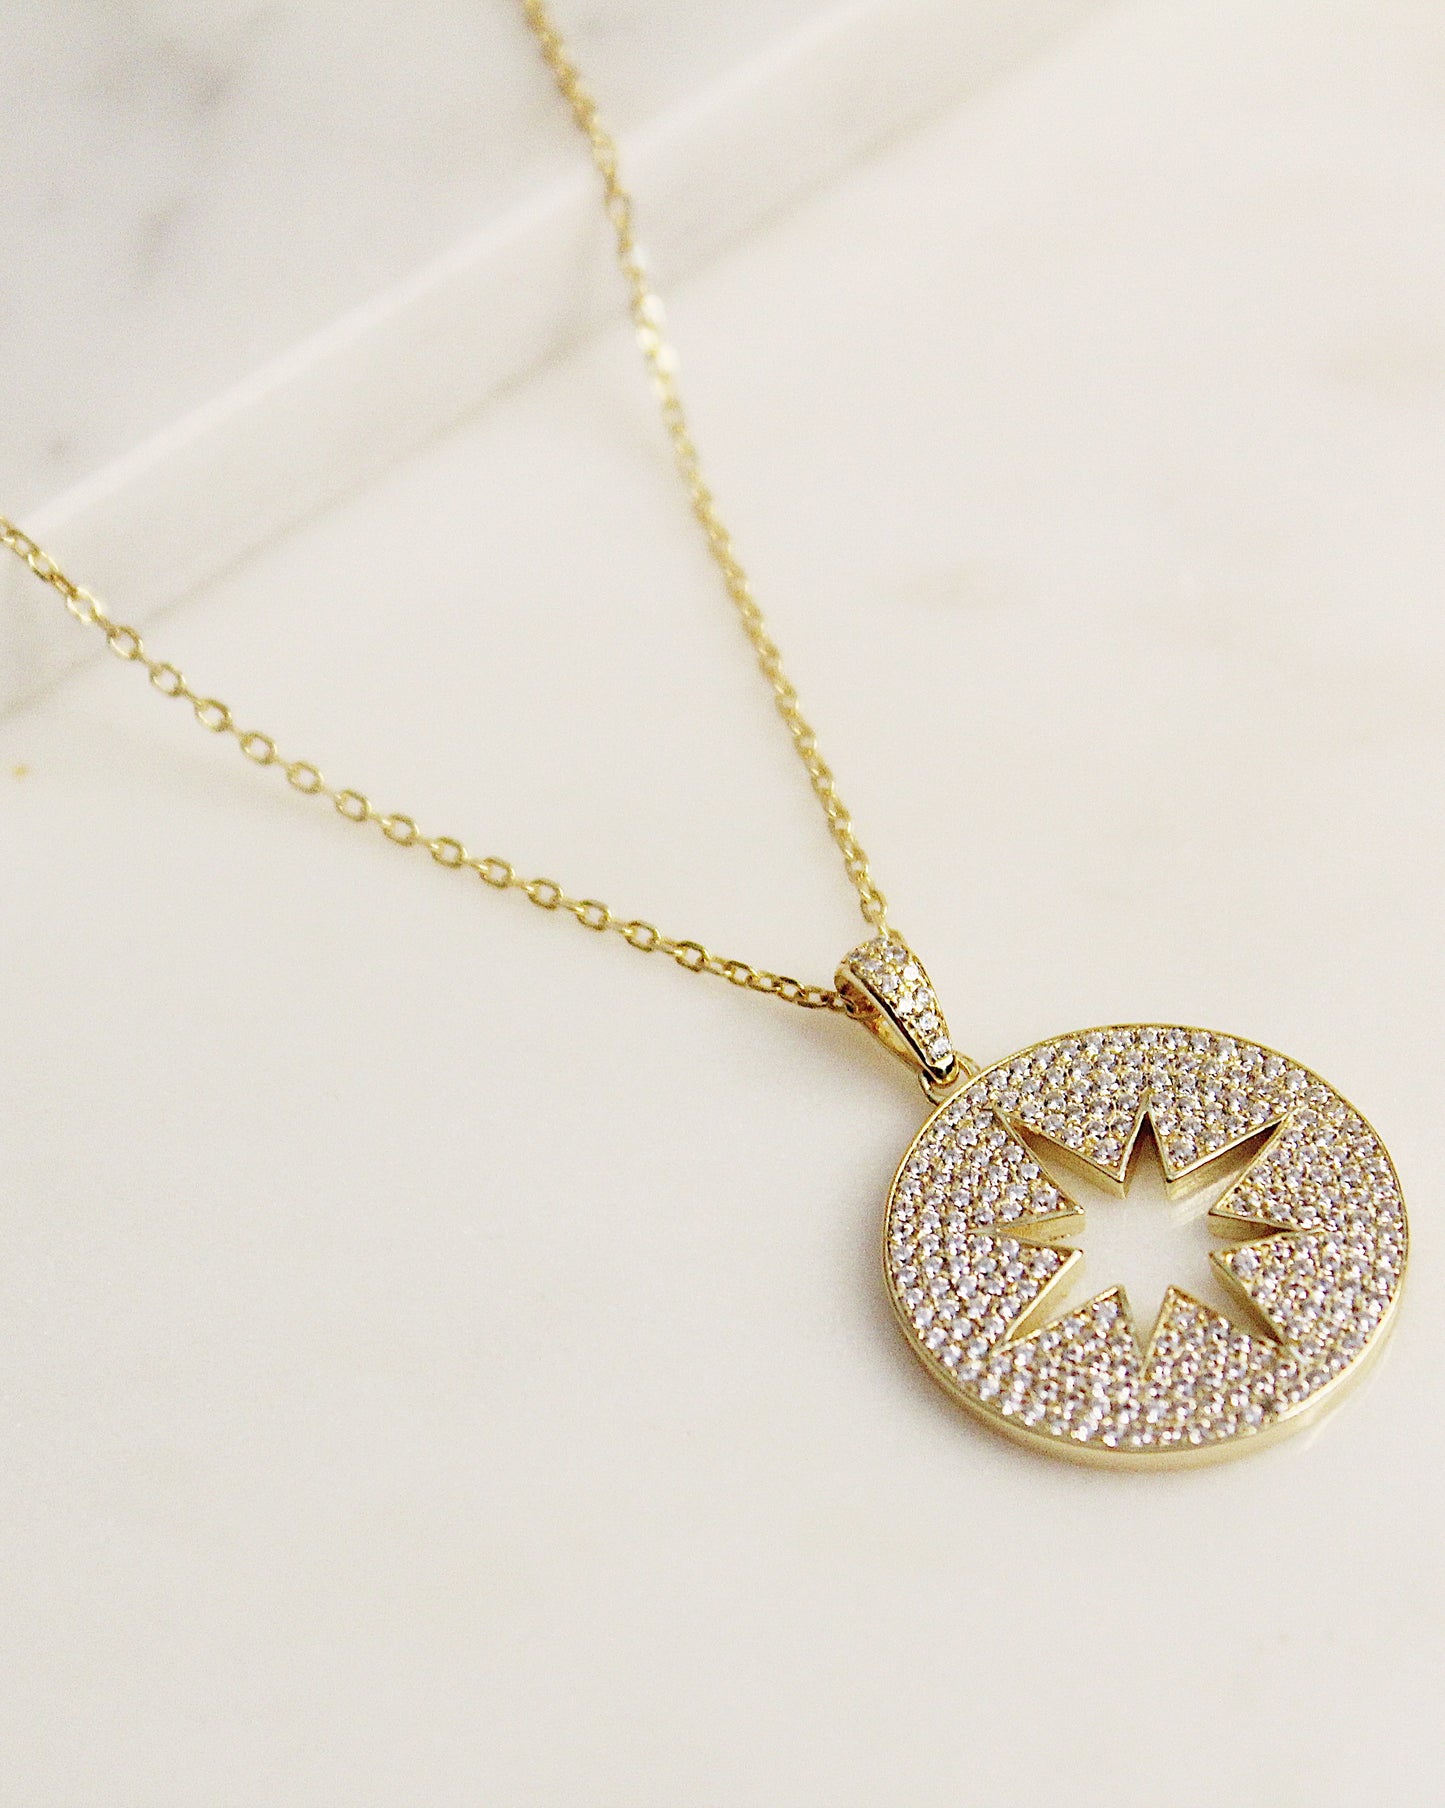 Queen of the North Star Necklace